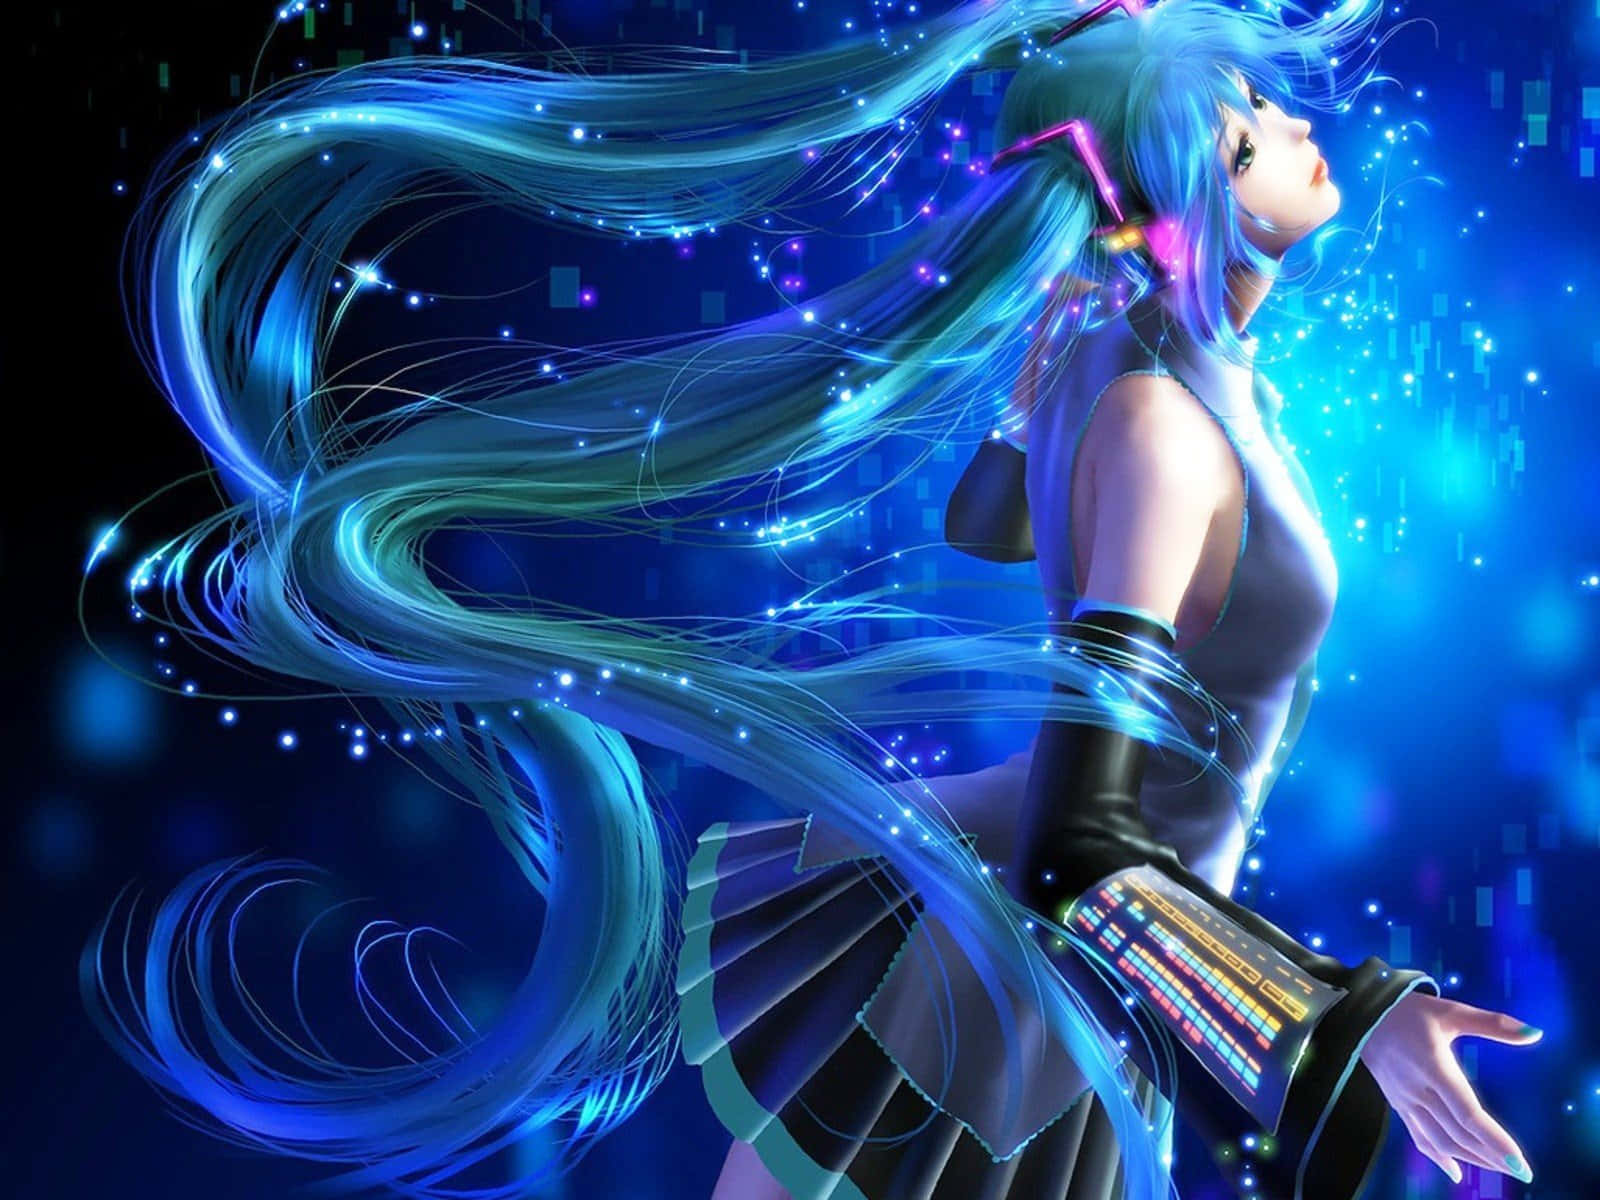 Experience the Music As You Join Hatsune Miku